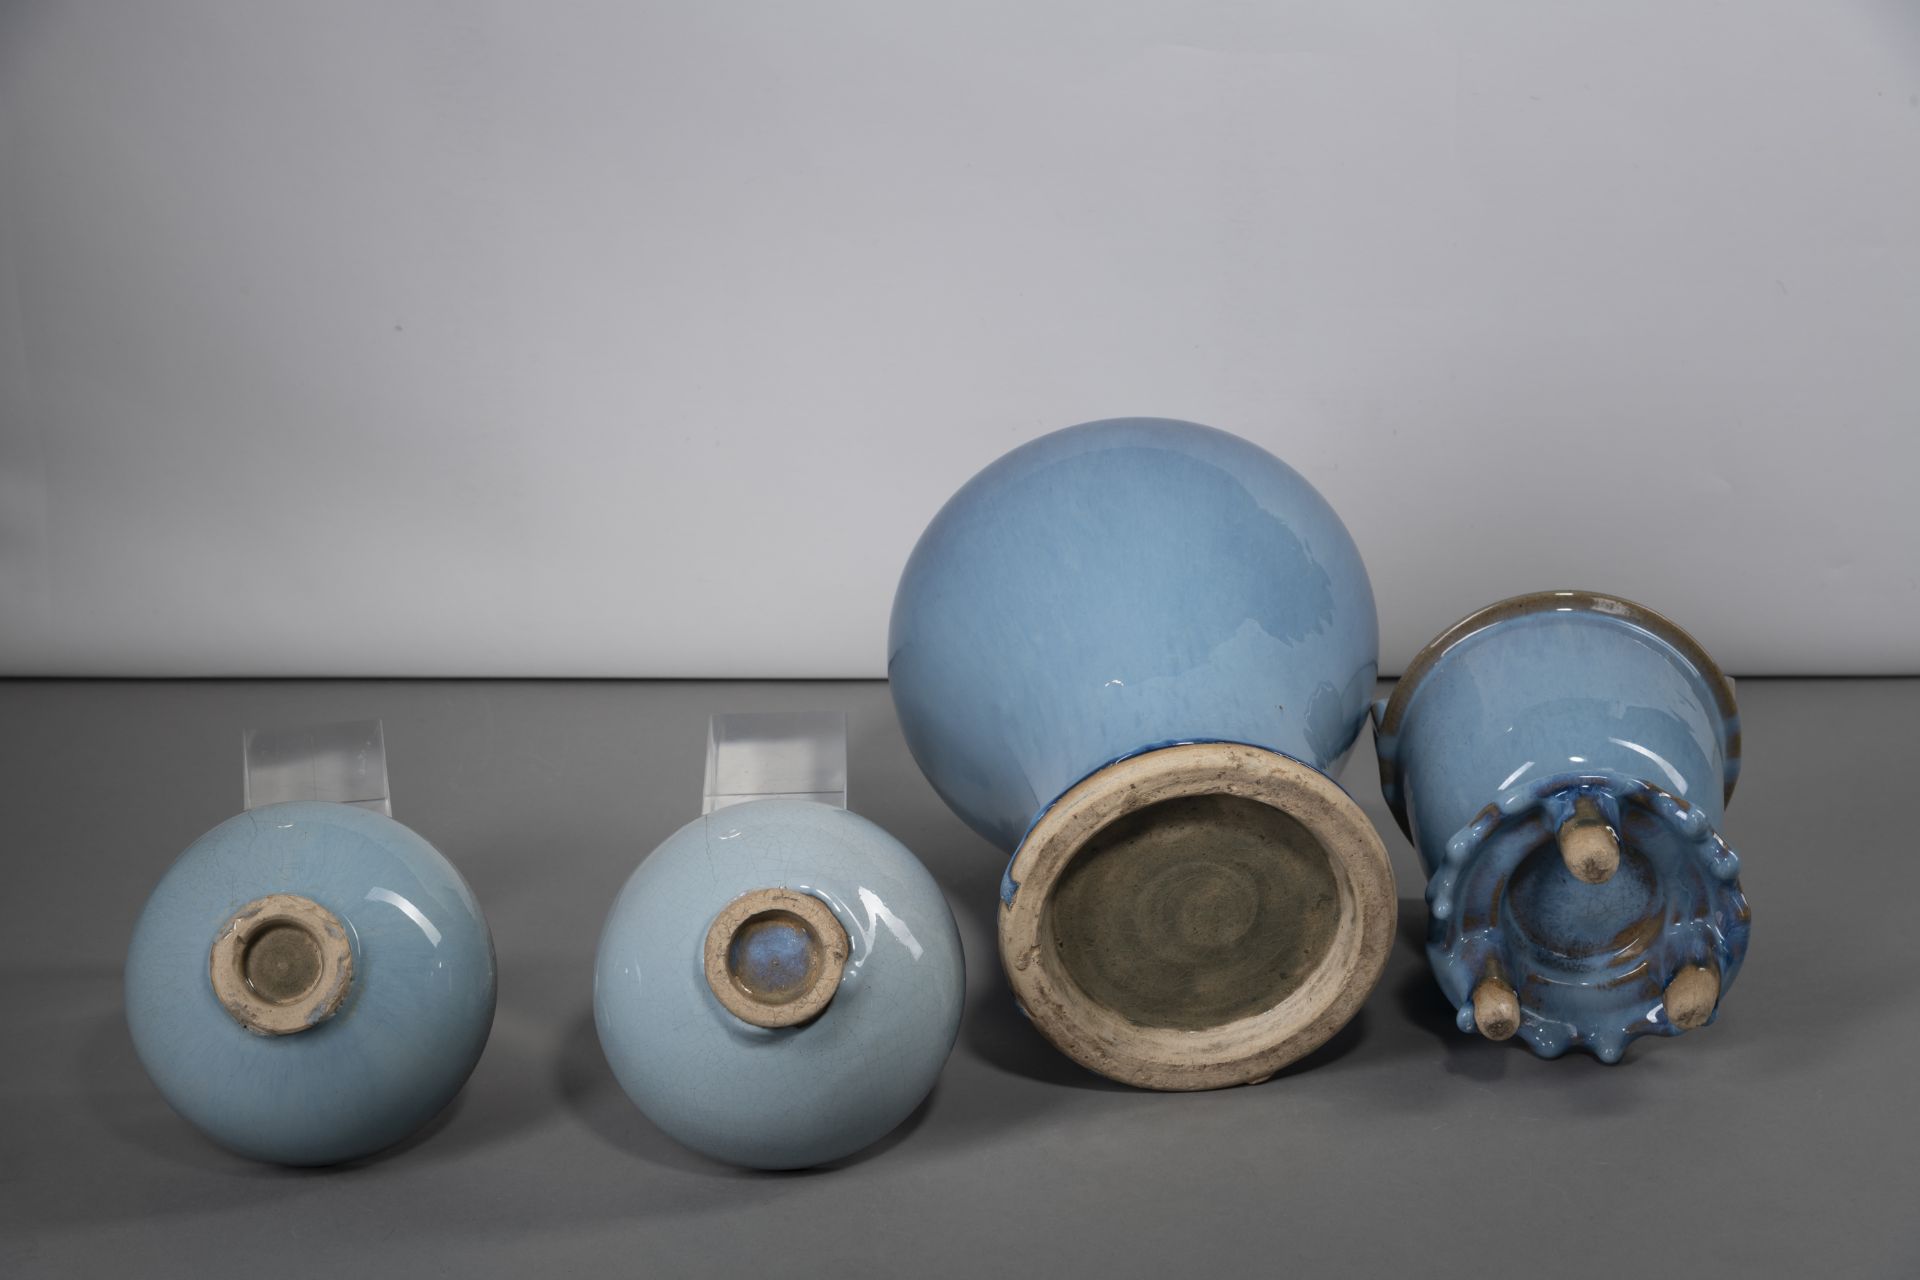 A PAIR OF JUN-GLAZED BOWLS, A TRIPOD CENSER, AND A VASE 'MEIPING' - Image 5 of 5